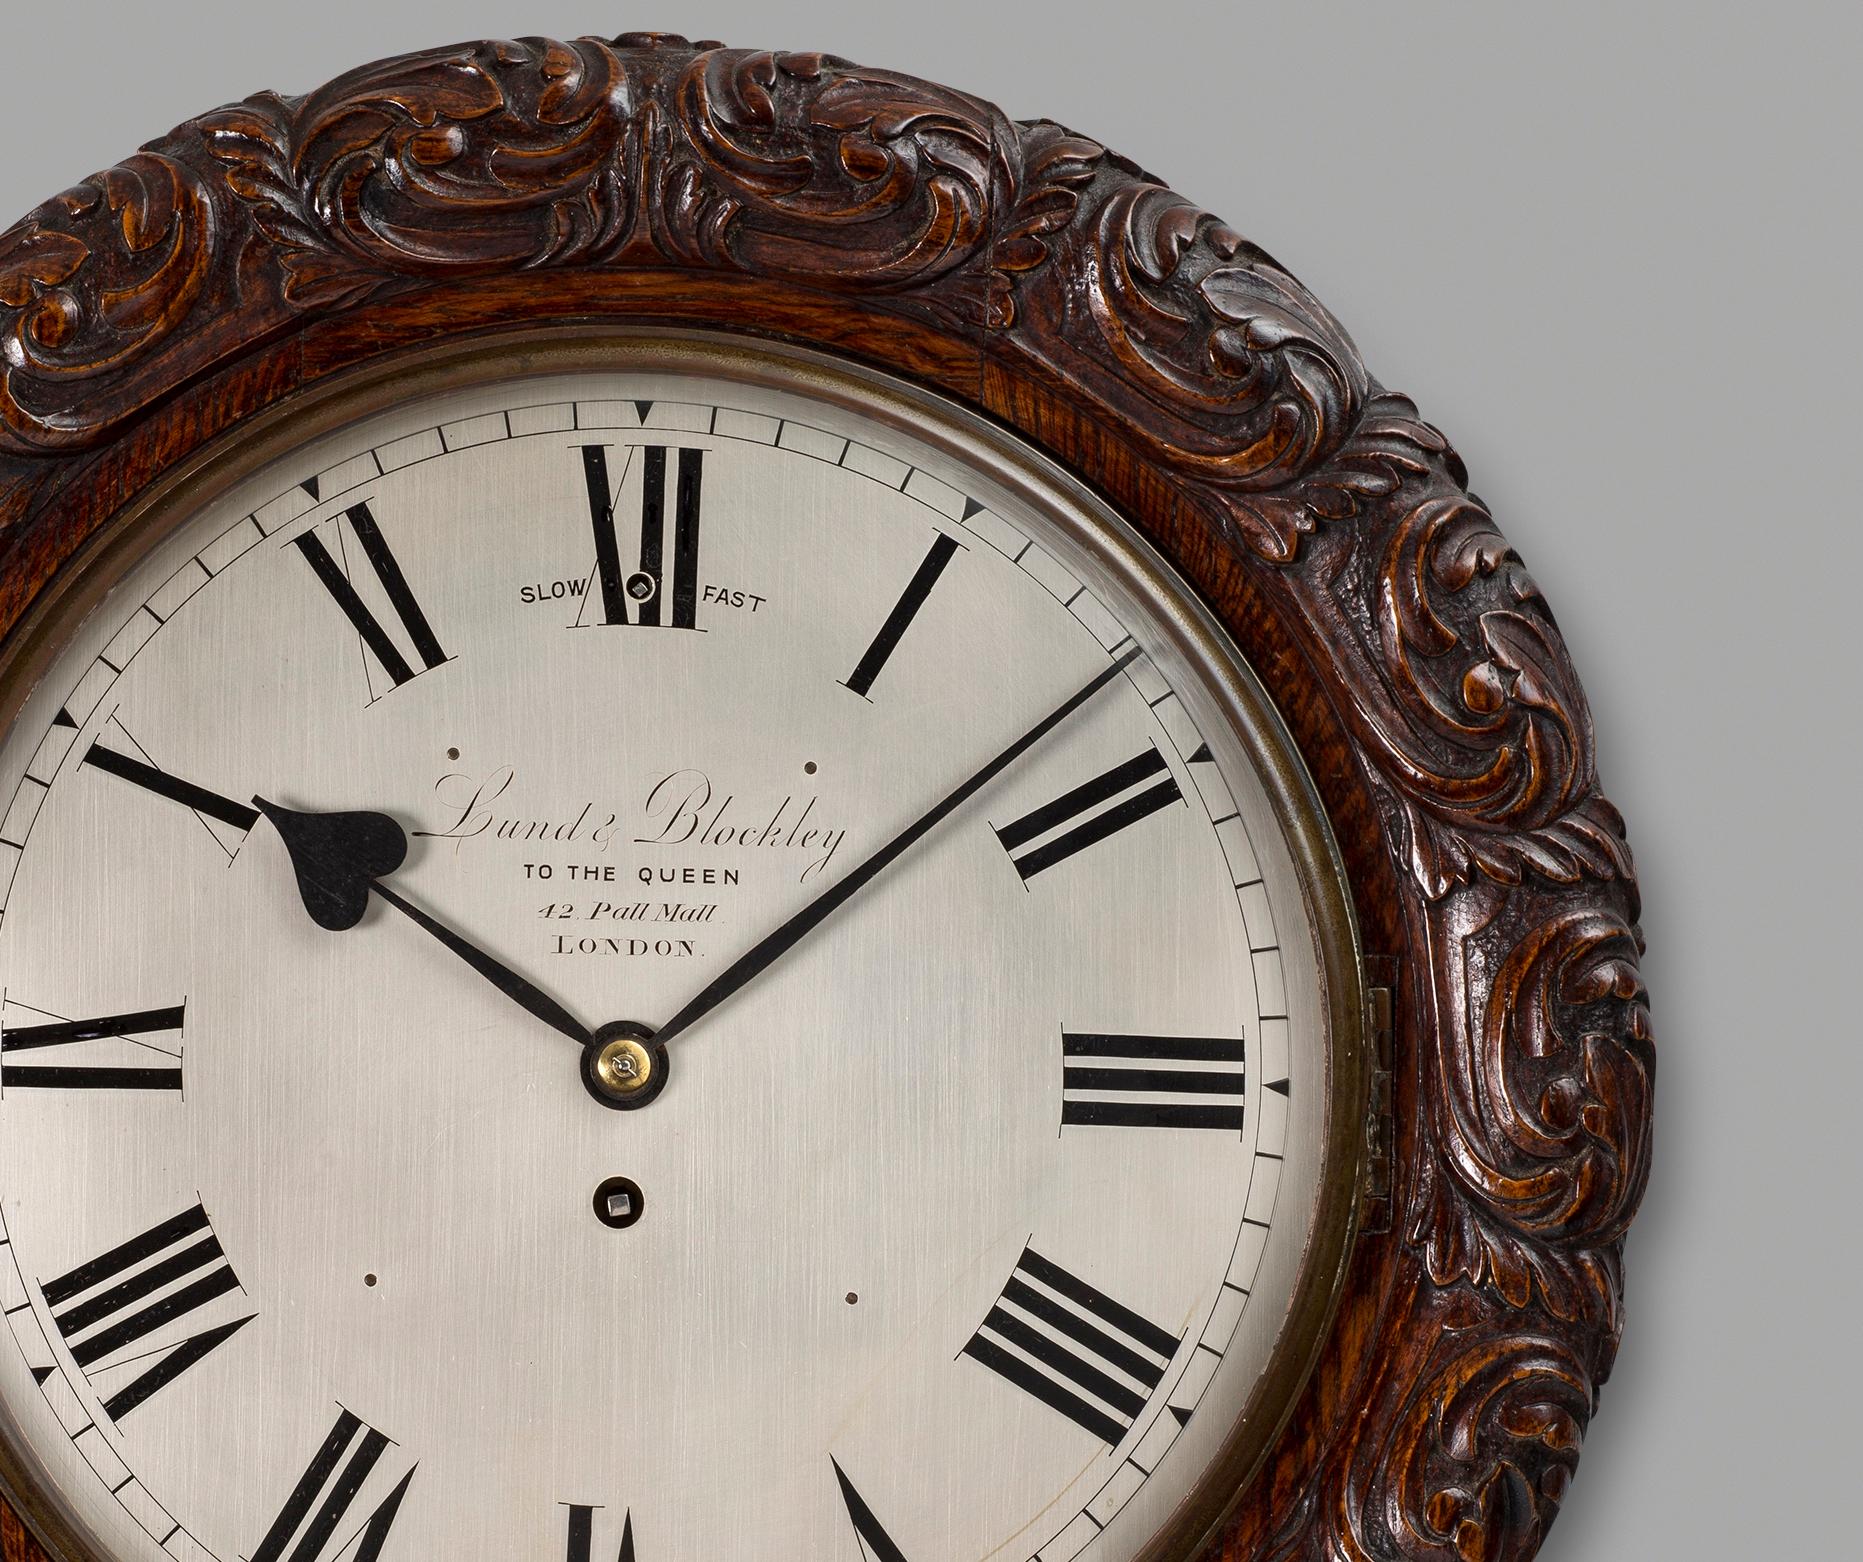 A fine quality antique, Victorian oak cased wall timepiece by this well-known clockmaking partnership. The substantial circular solid oak case has a surround to the dial, exceptionally well carved with flowing scrollwork and foliage. The 12 inch